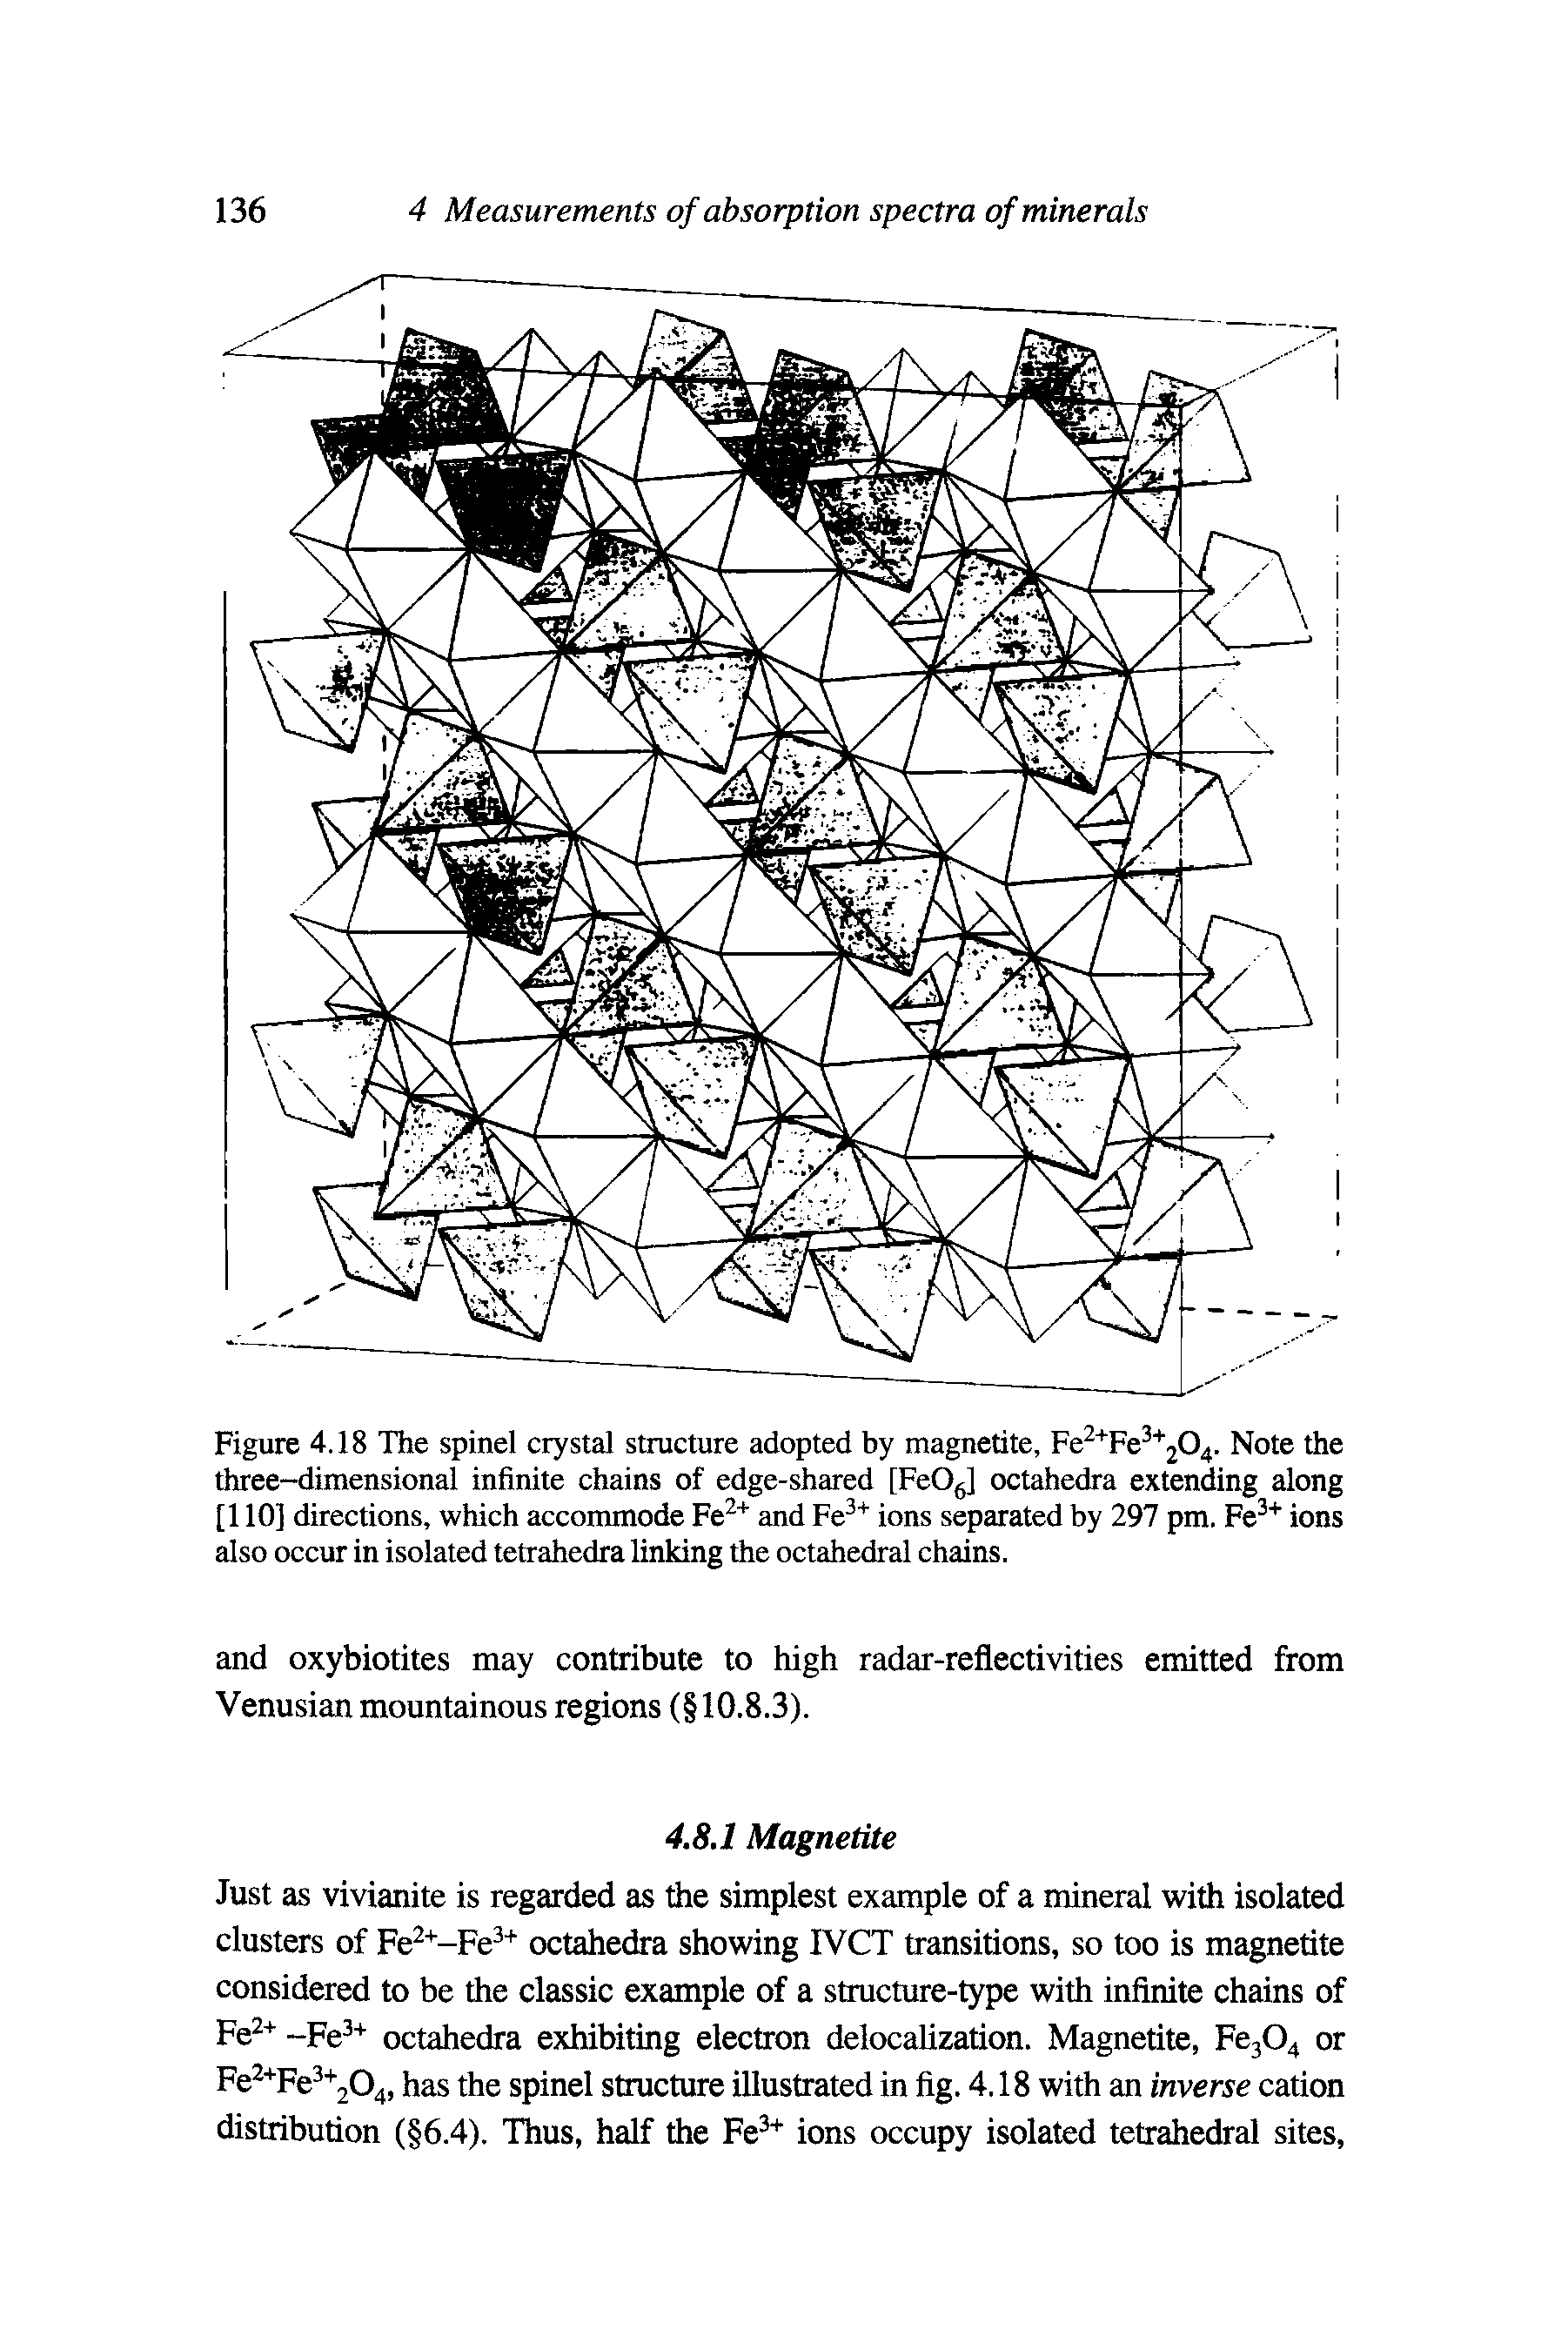 Figure 4.18 The spinel crystal structure adopted by magnetite, Fe2+Fe3+204. Note the three-dimensional infinite chains of edge-shared [FeOe] octahedra extending along [110] directions, which accommode Fe2+ and Fe3+ ions separated by 297 pm. Fe3+ ions also occur in isolated tetrahedra linking the octahedral chains.